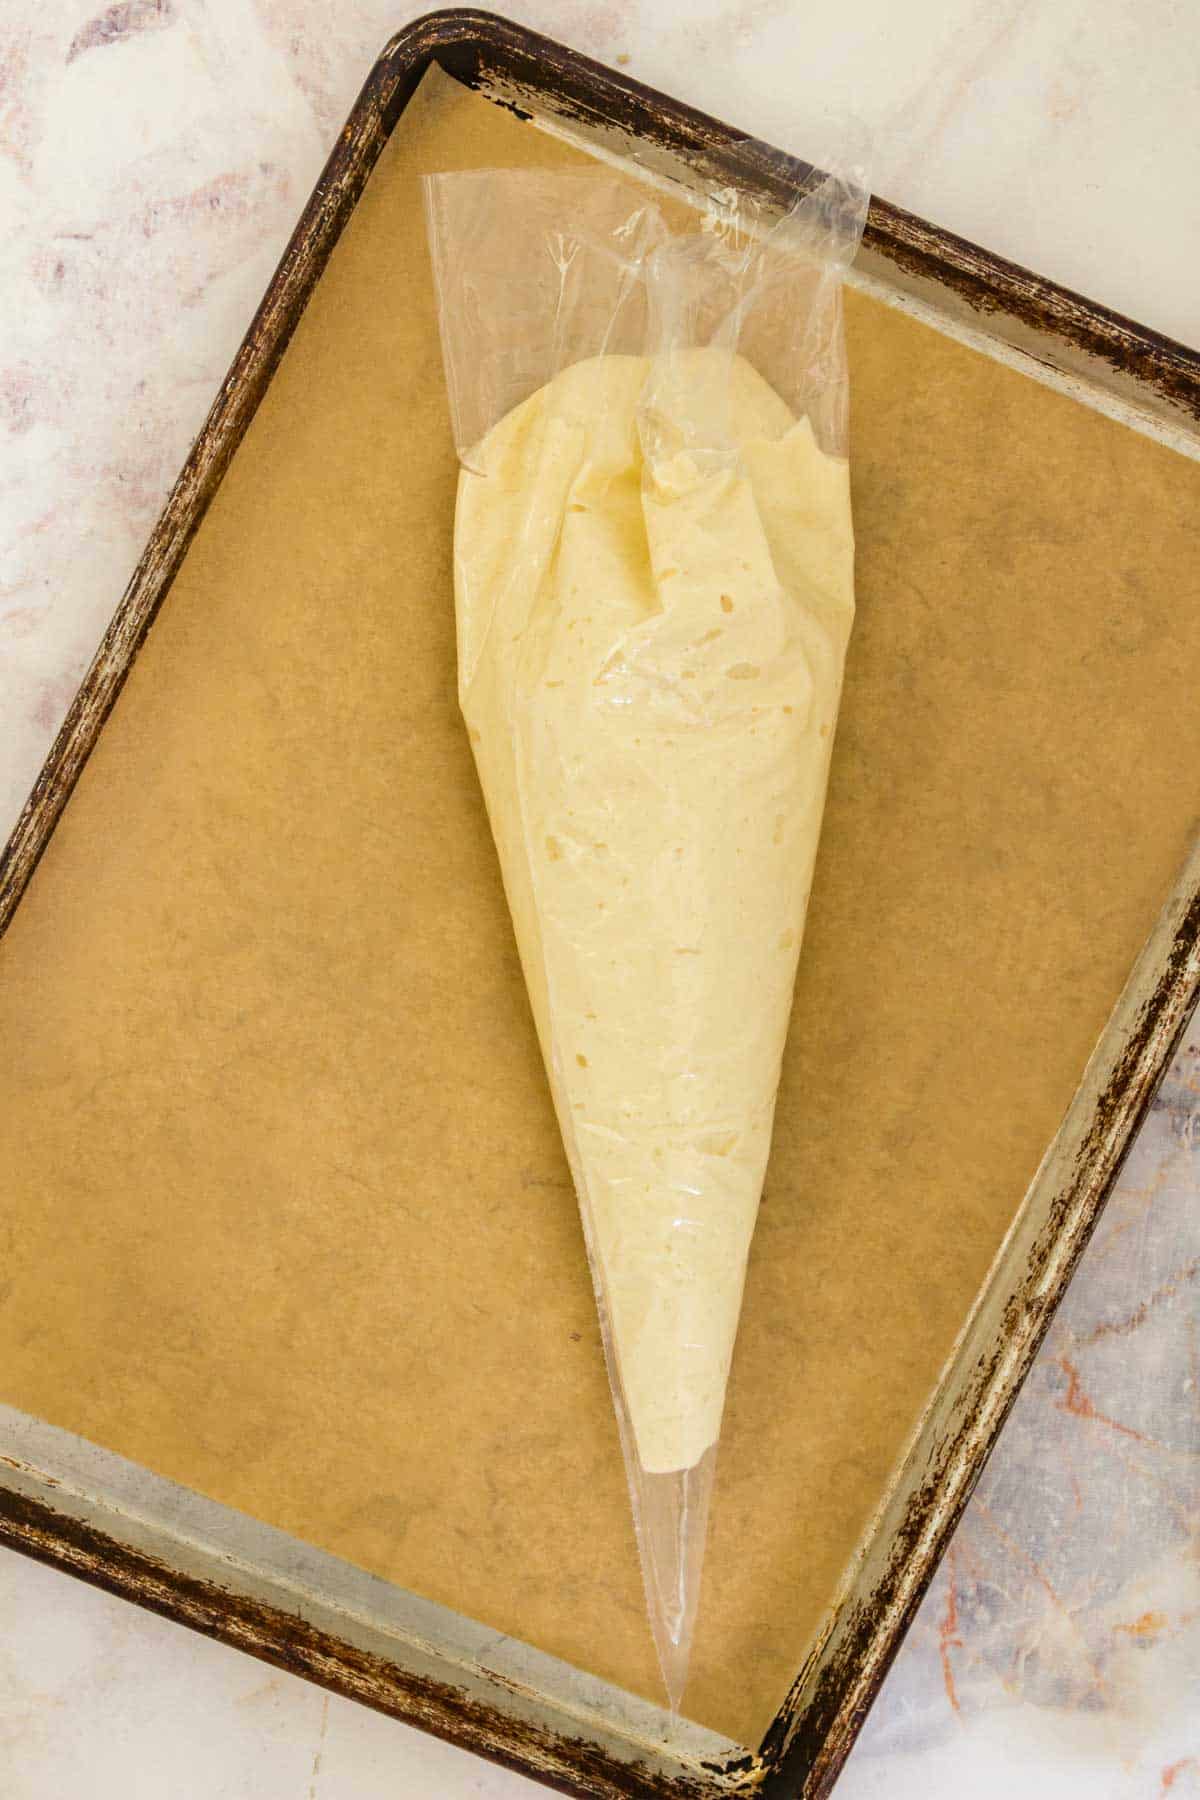 A piping bag filled with the batter for gluten free ladyfingers, resting on a parchment lined baking sheet.